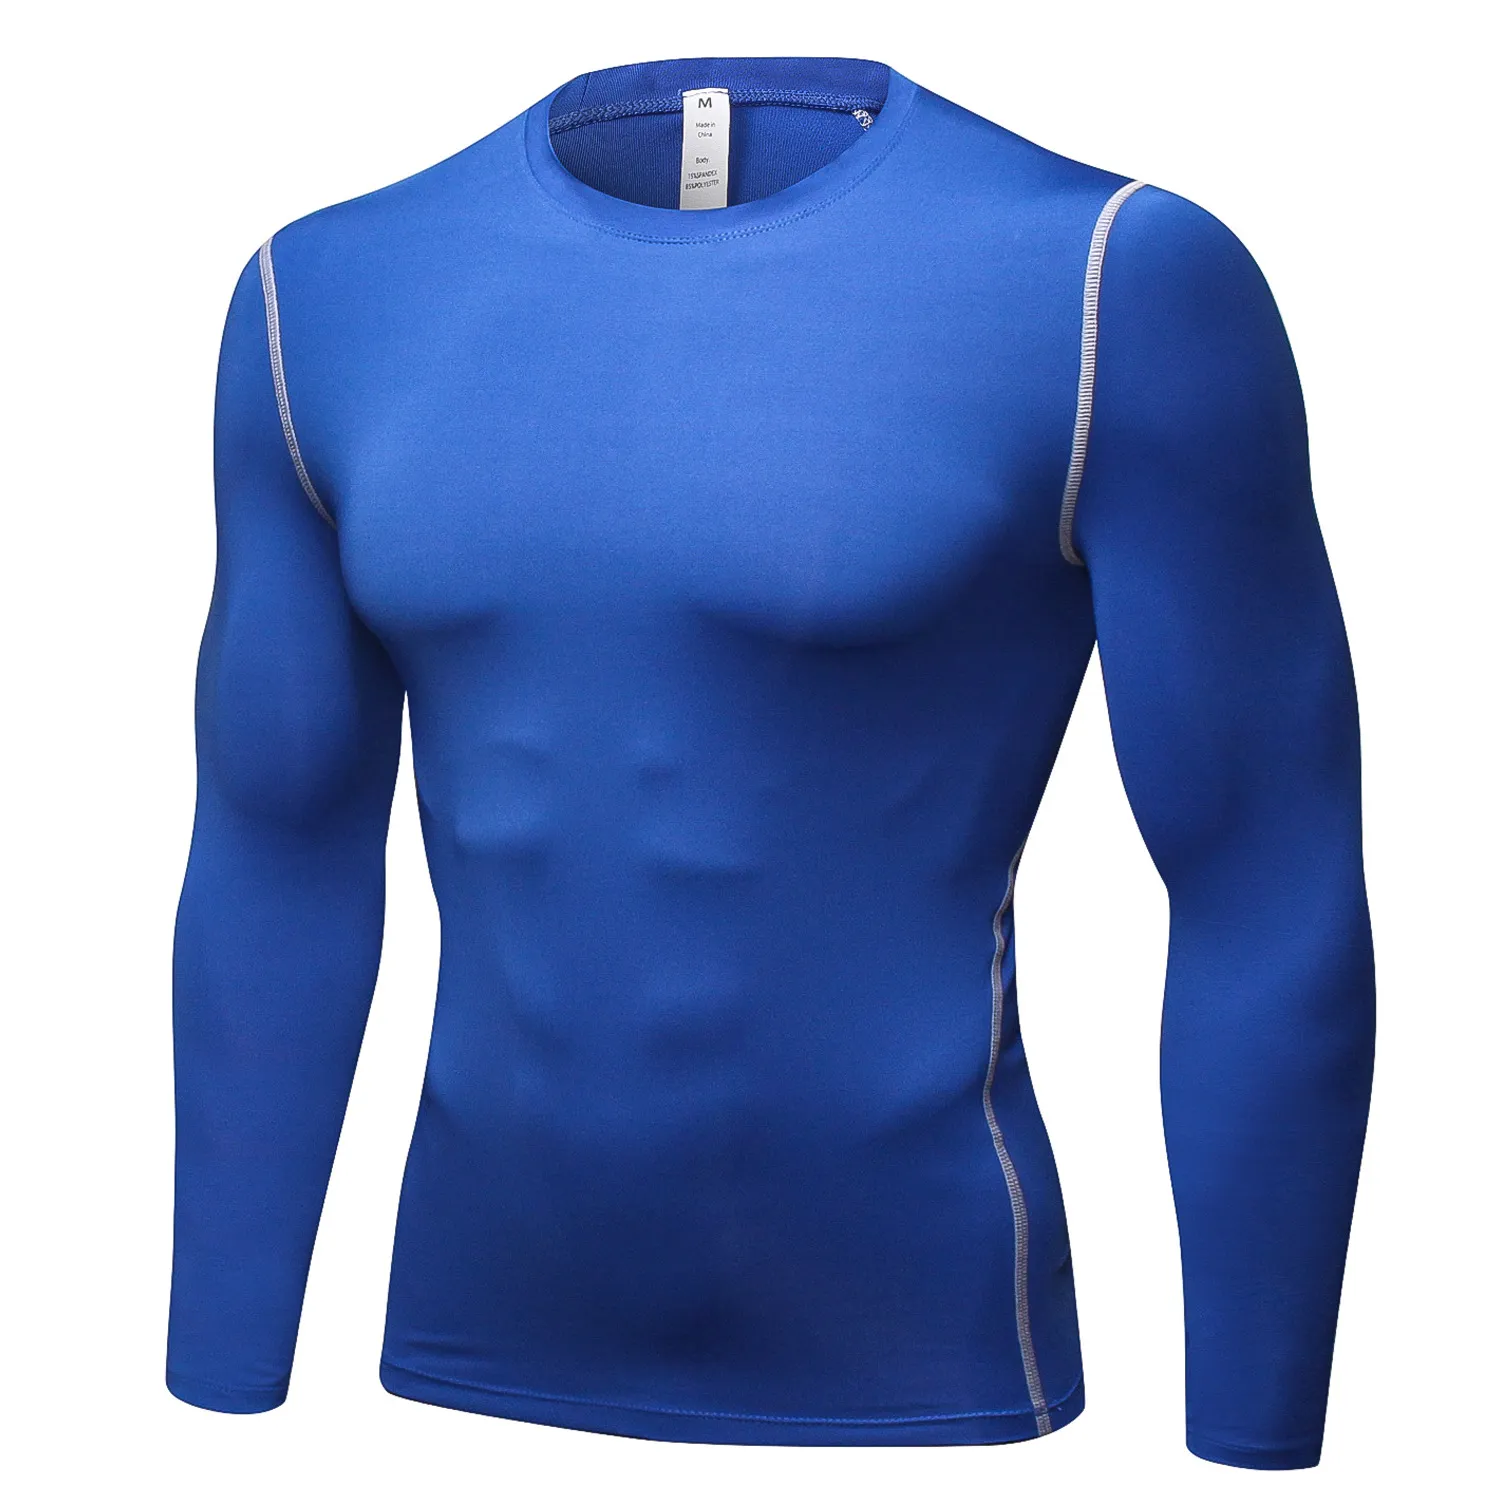 Men Short Sleeve Fitness Basketball Running Sports T shirt Thermal Muscle Bodybuilding Gym Compression Tights Jersey Jacket Tops